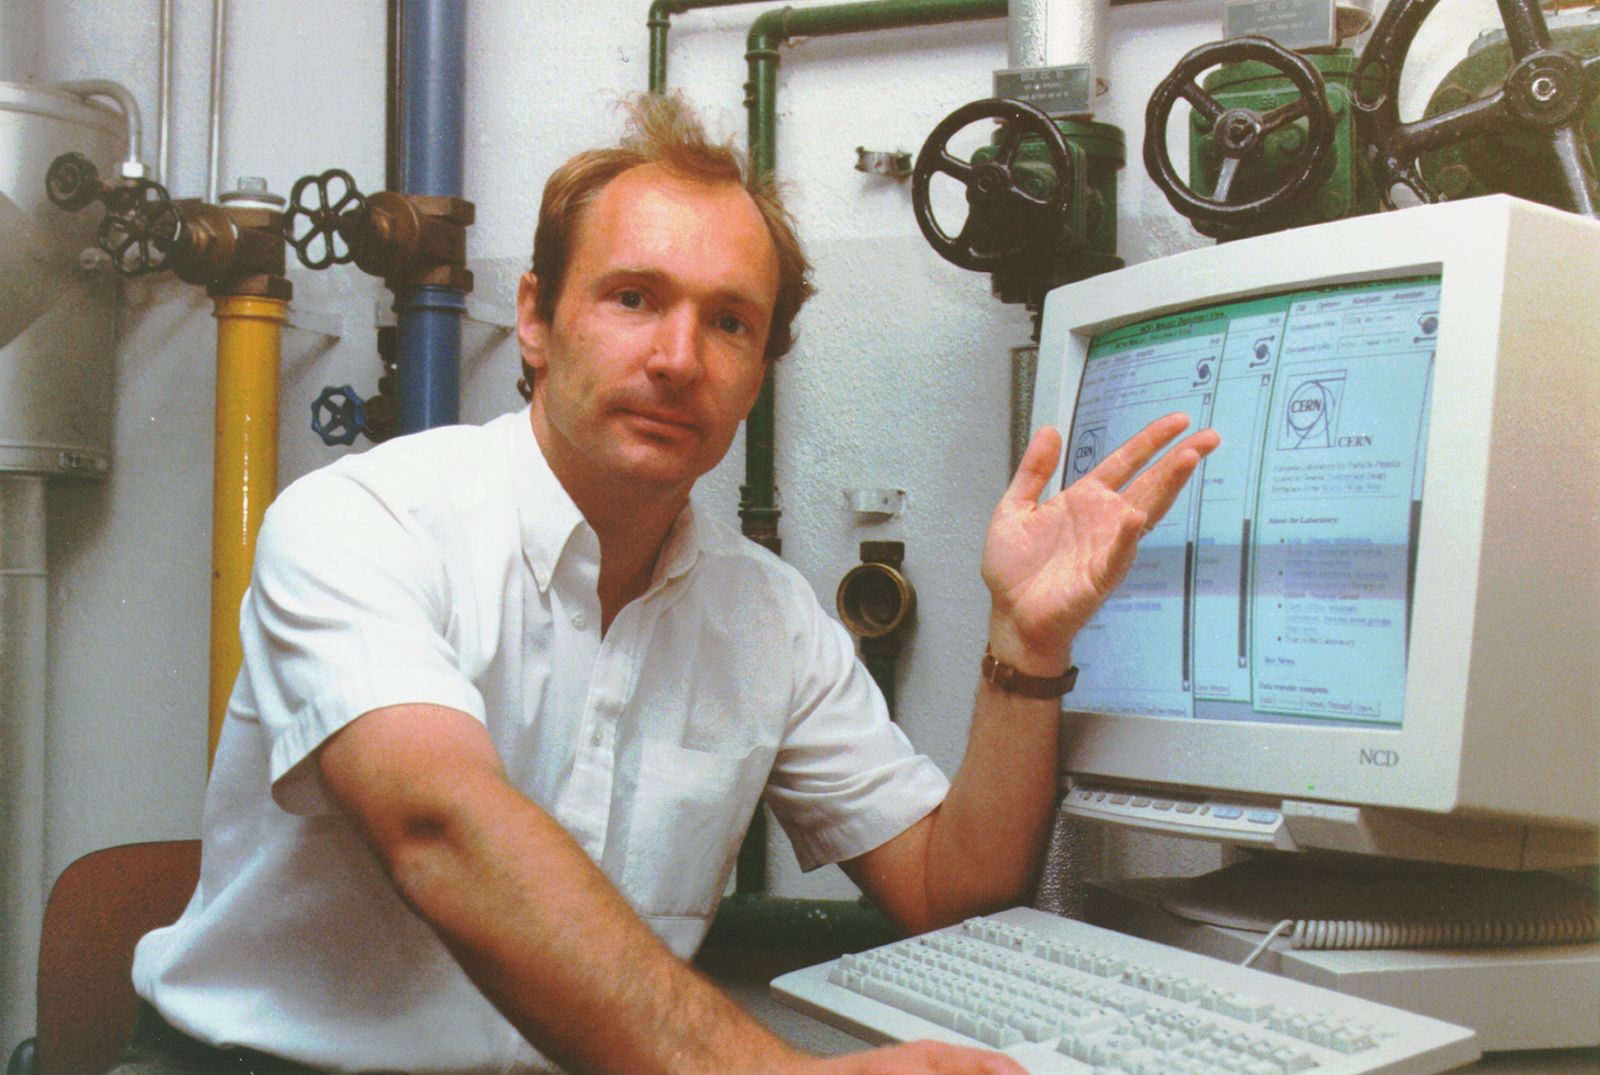 The World Wide Web’s inventor sold its original code for $5.4 million | CNN